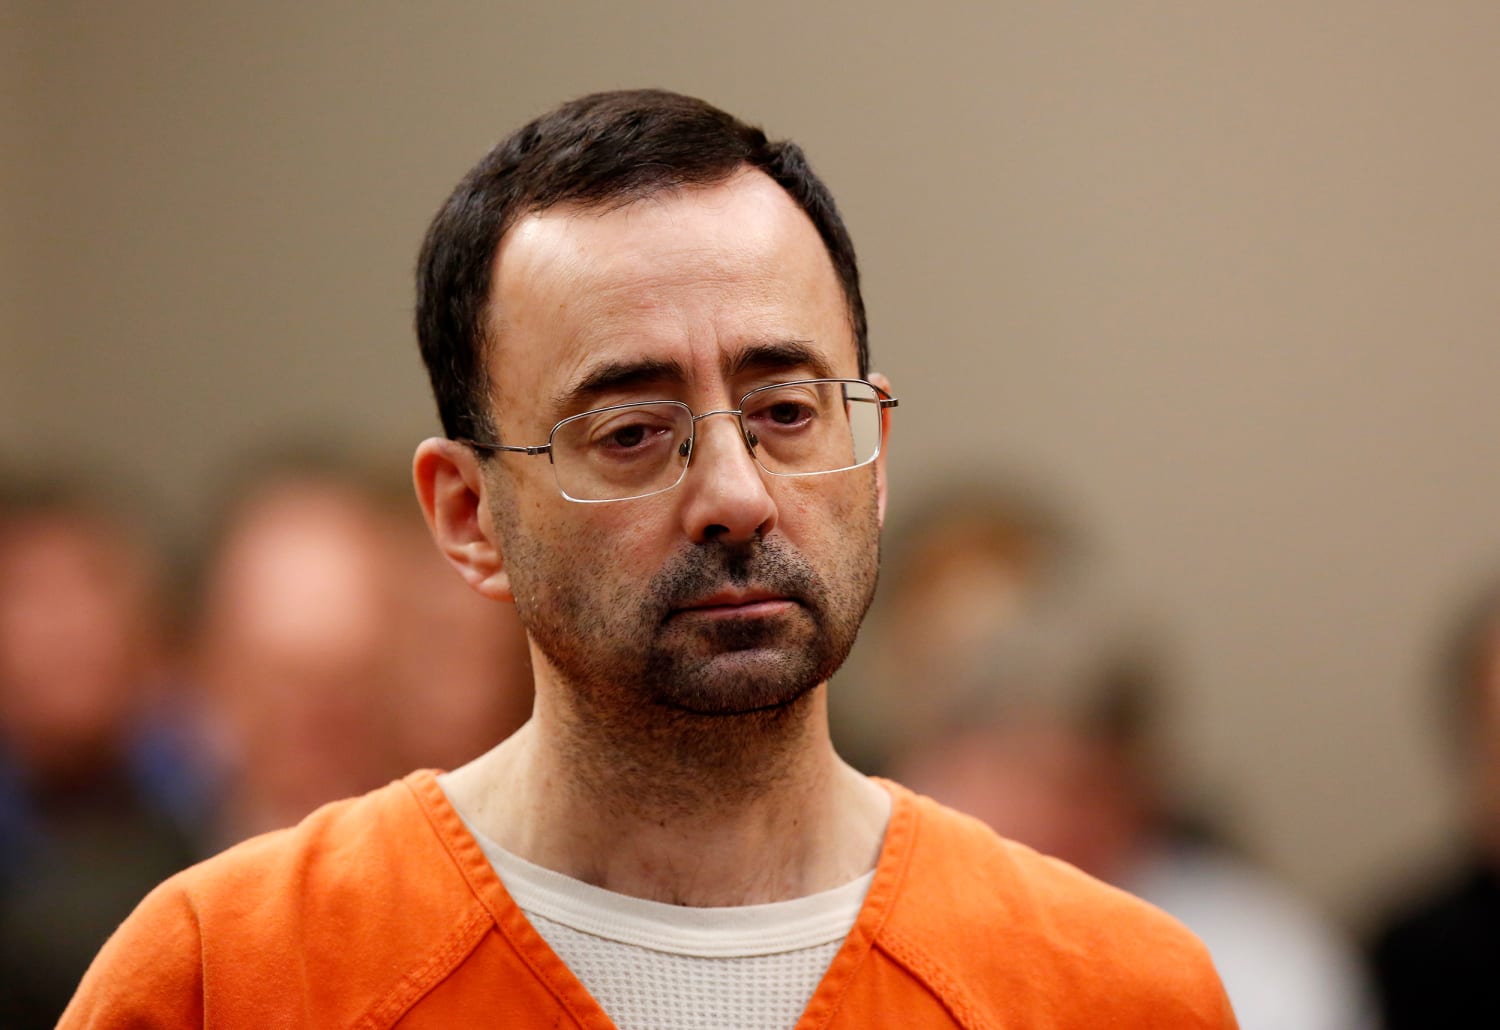 Larry Nassar victims accuse Michigan State of ‘secret votes’ to hide records about the disgraced sports doctor